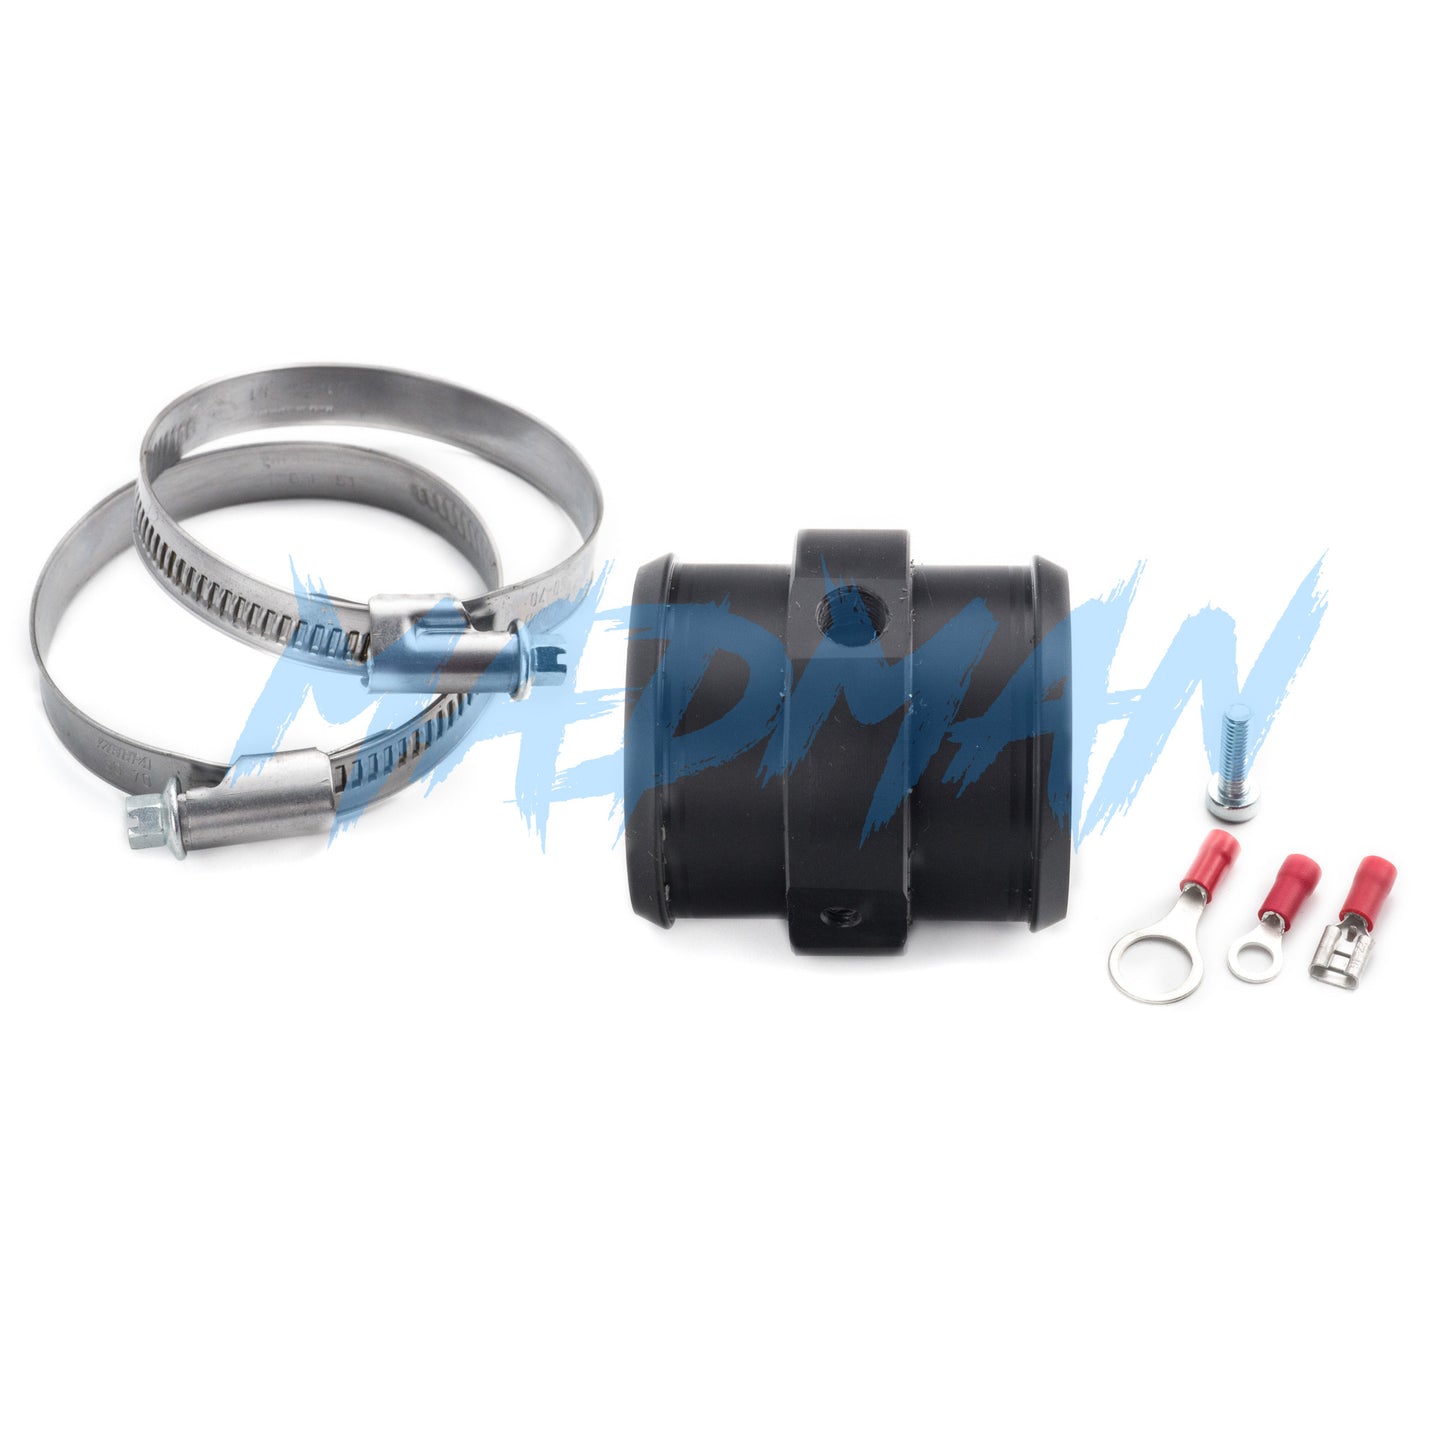 50mm (2") Coolant Hose Adapter